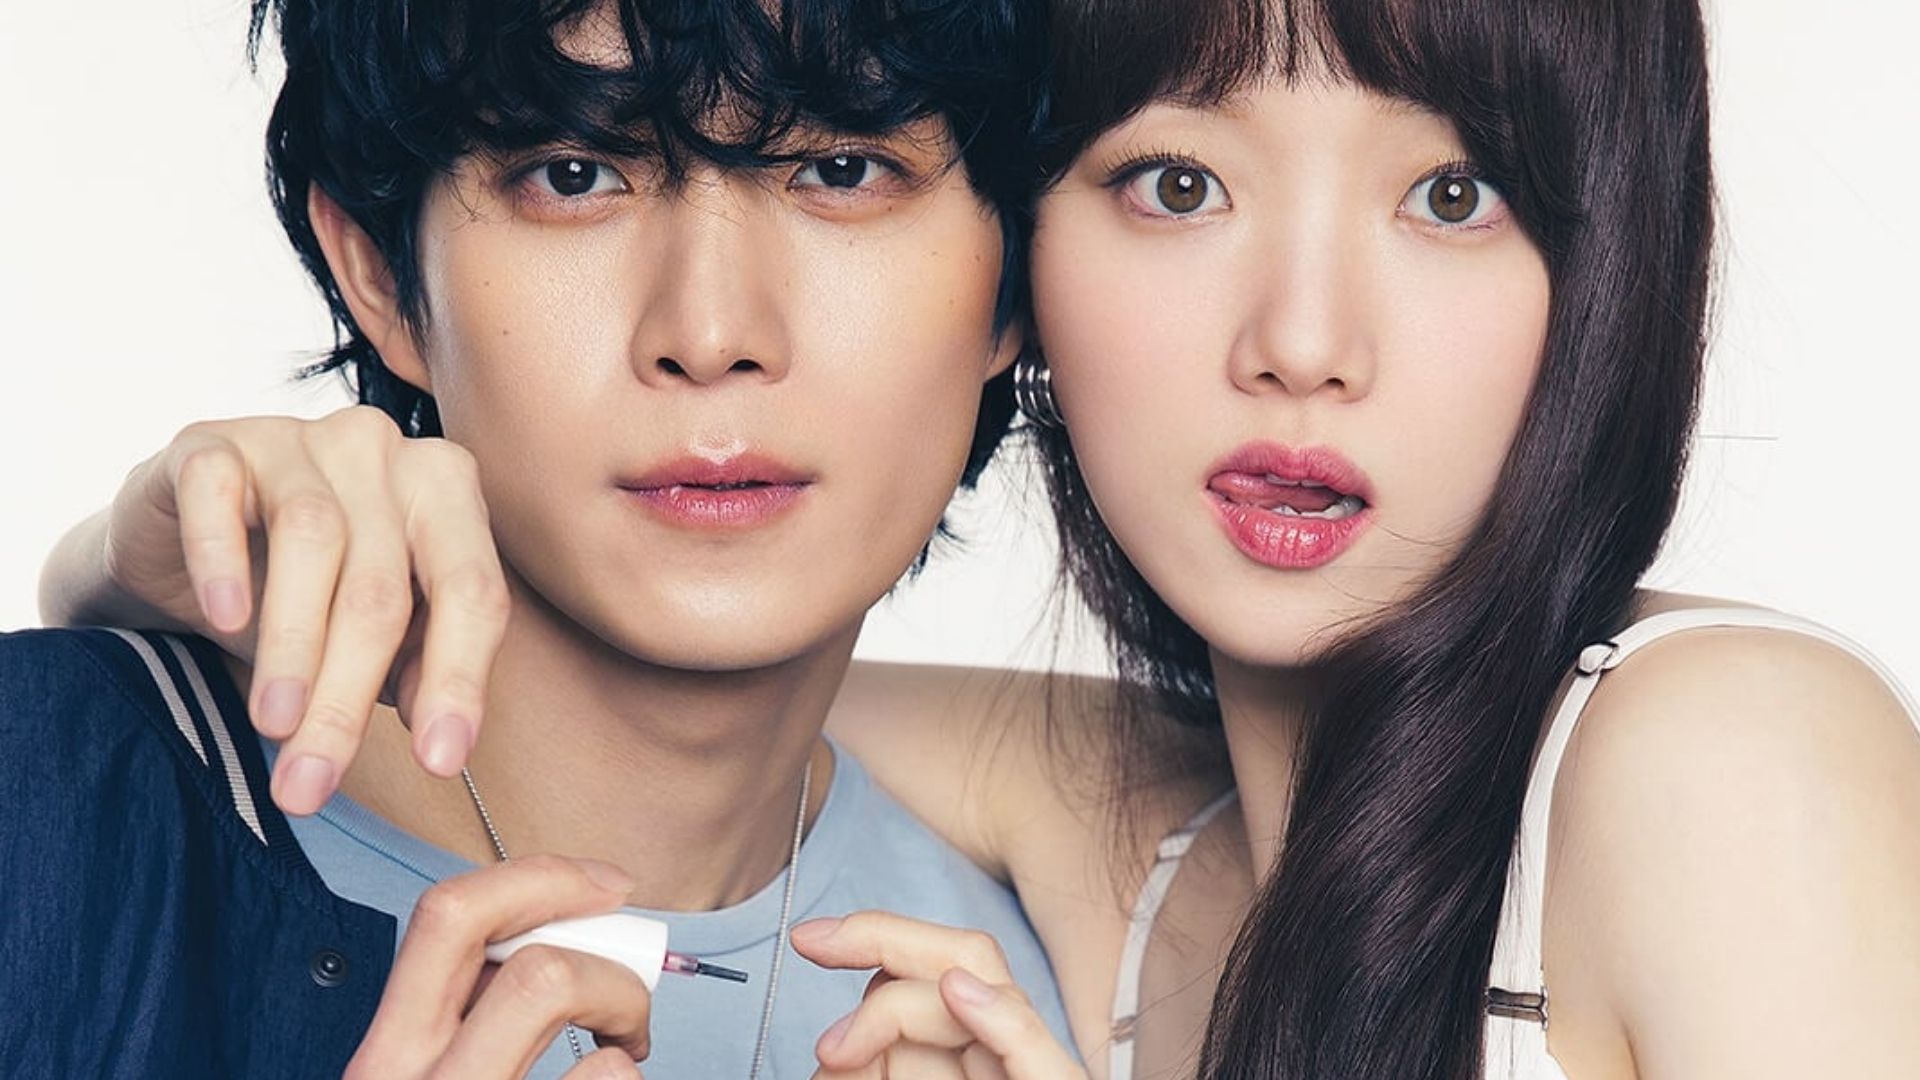 “Sh**ting Stars” – Lee Sung Kyung and Kim Young Dae Share Their Working Experience